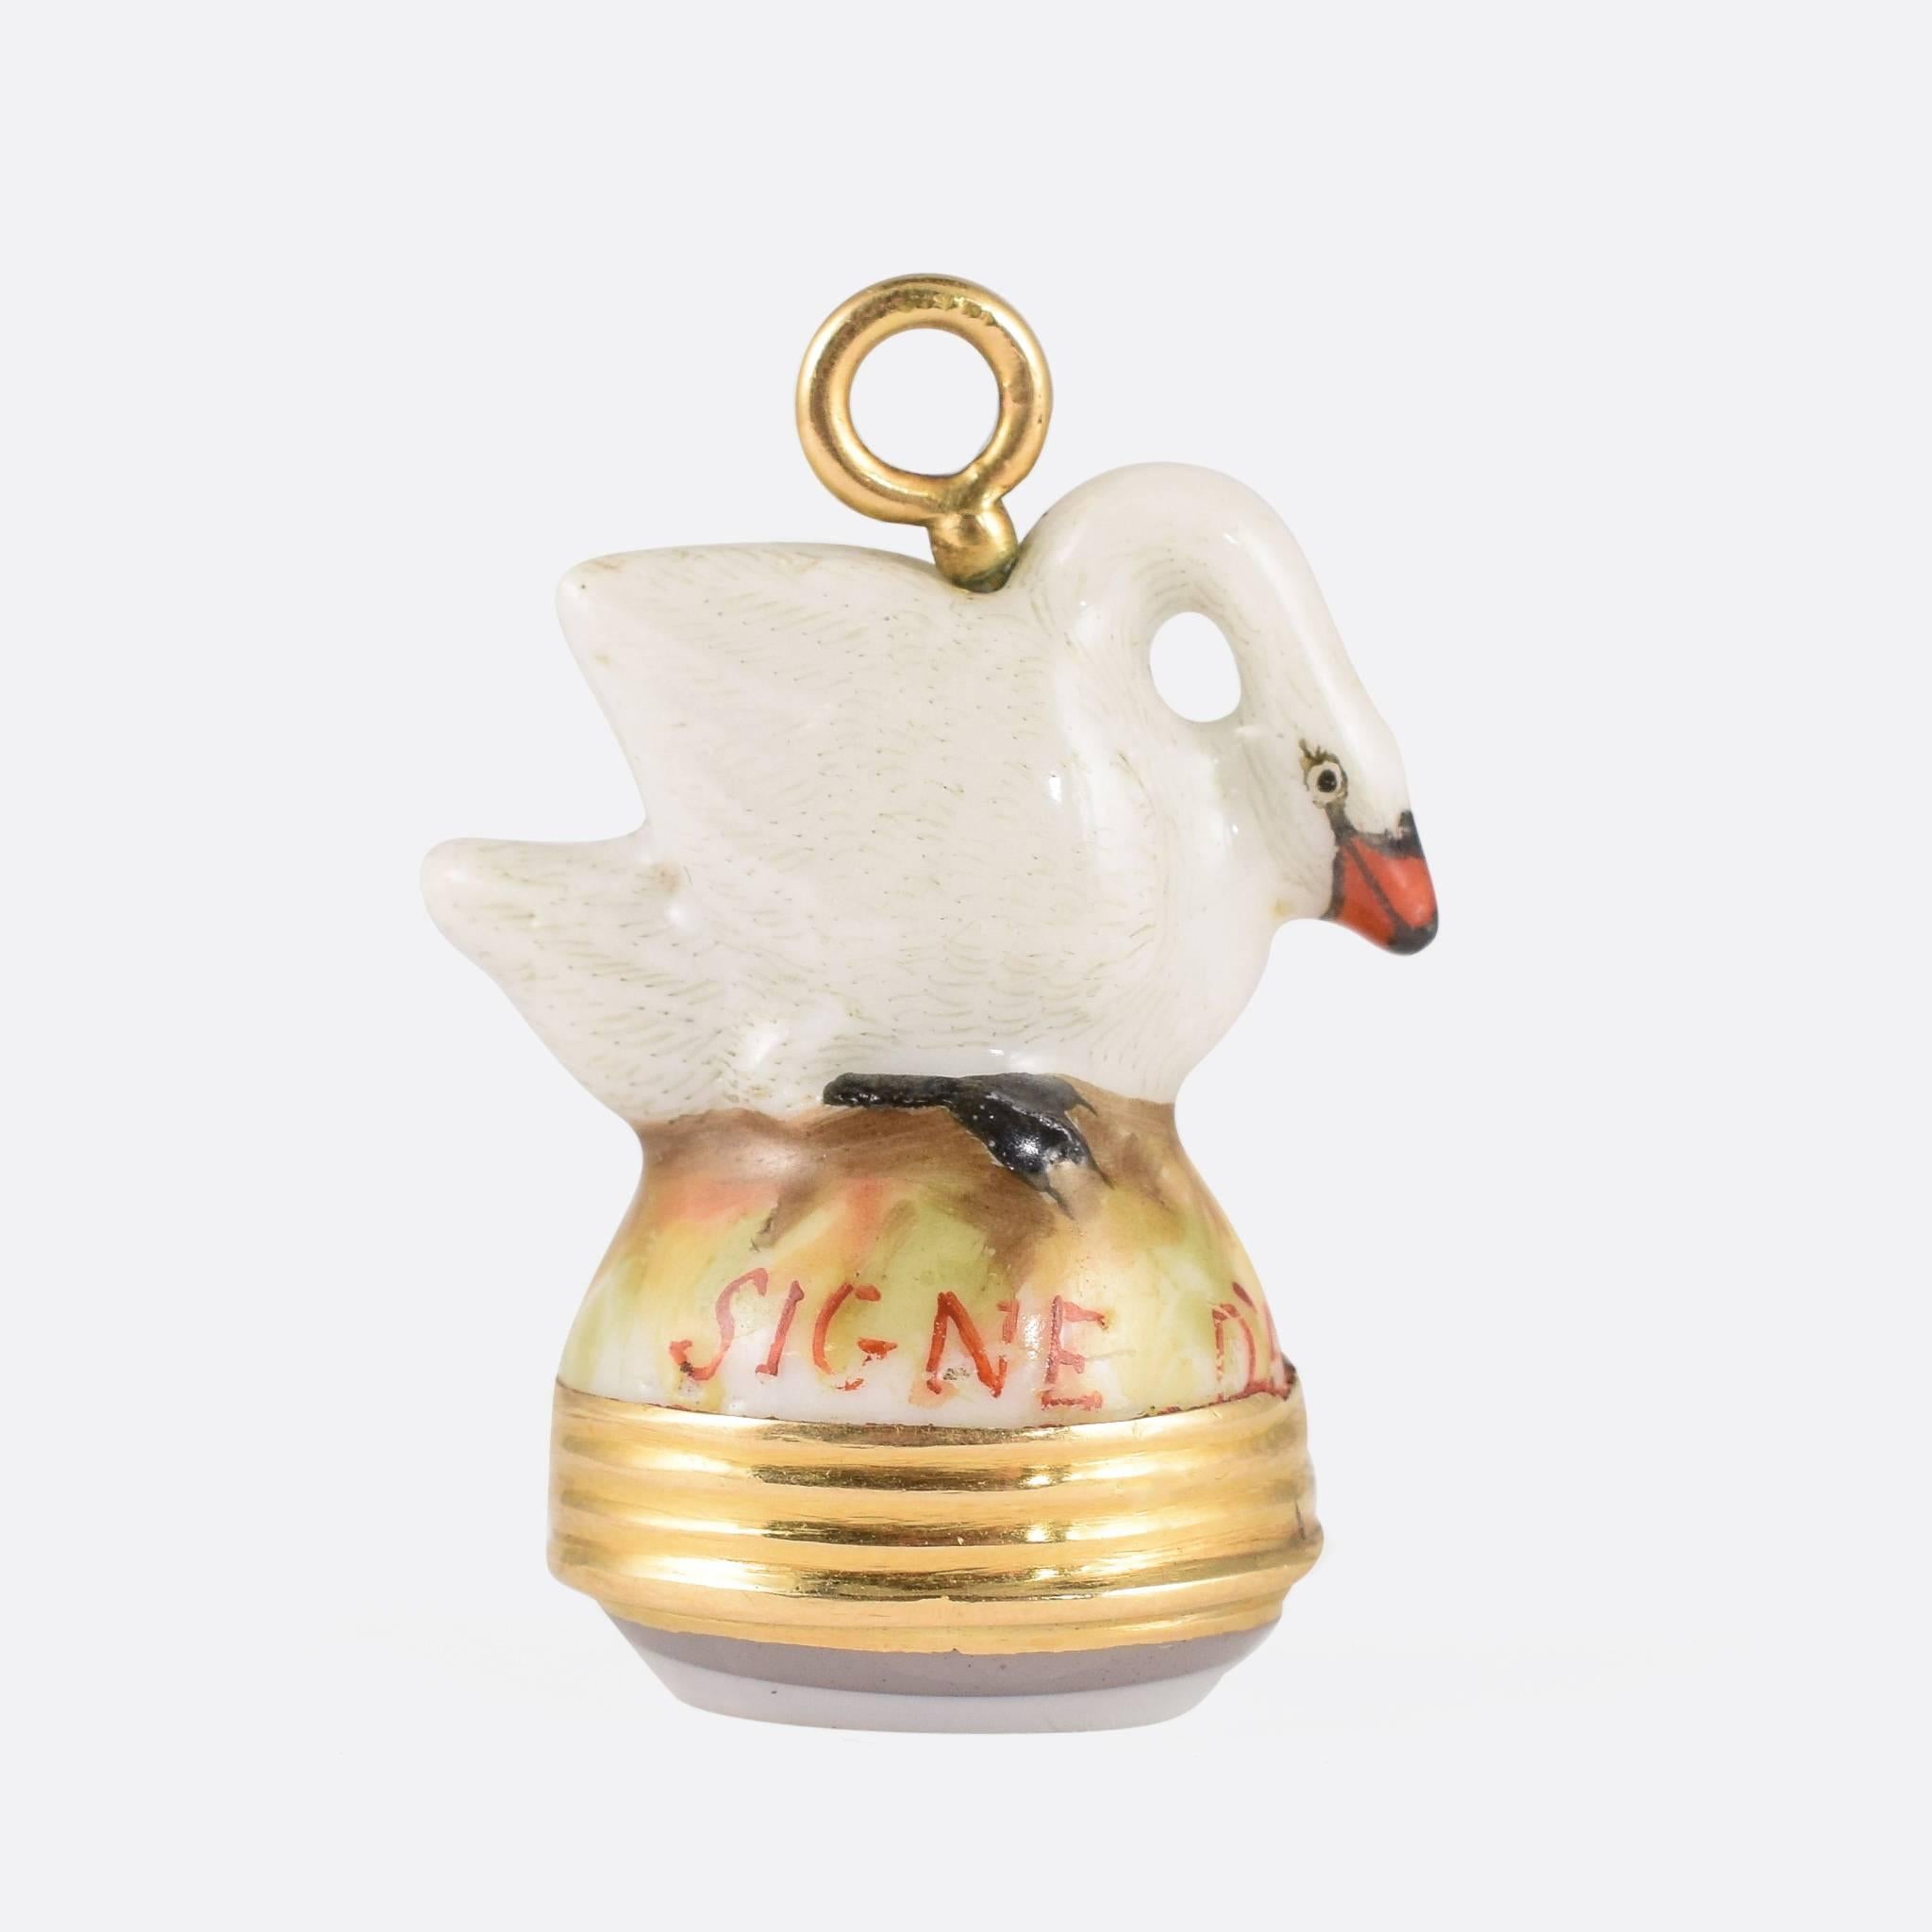 An original 18th Century porcelain Derby Chelsea period fob seal. This particular piece features a nesting swan and displays the vivid colouring typical of the Derby factory. The design is older, however, originating from the earlier work of the